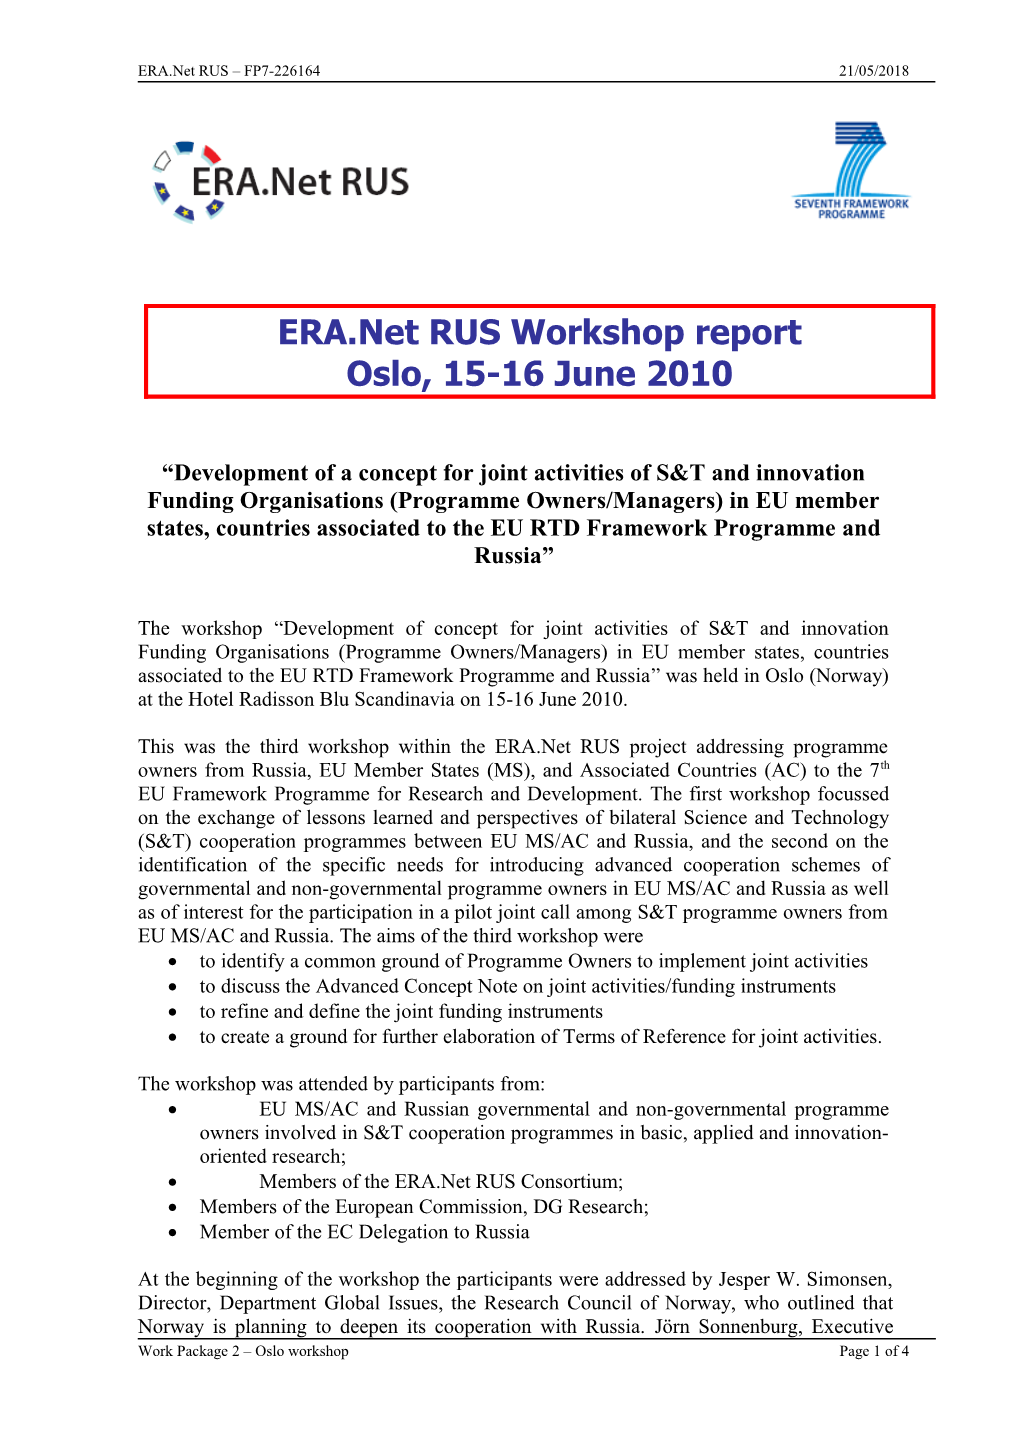 Report on the Workshop